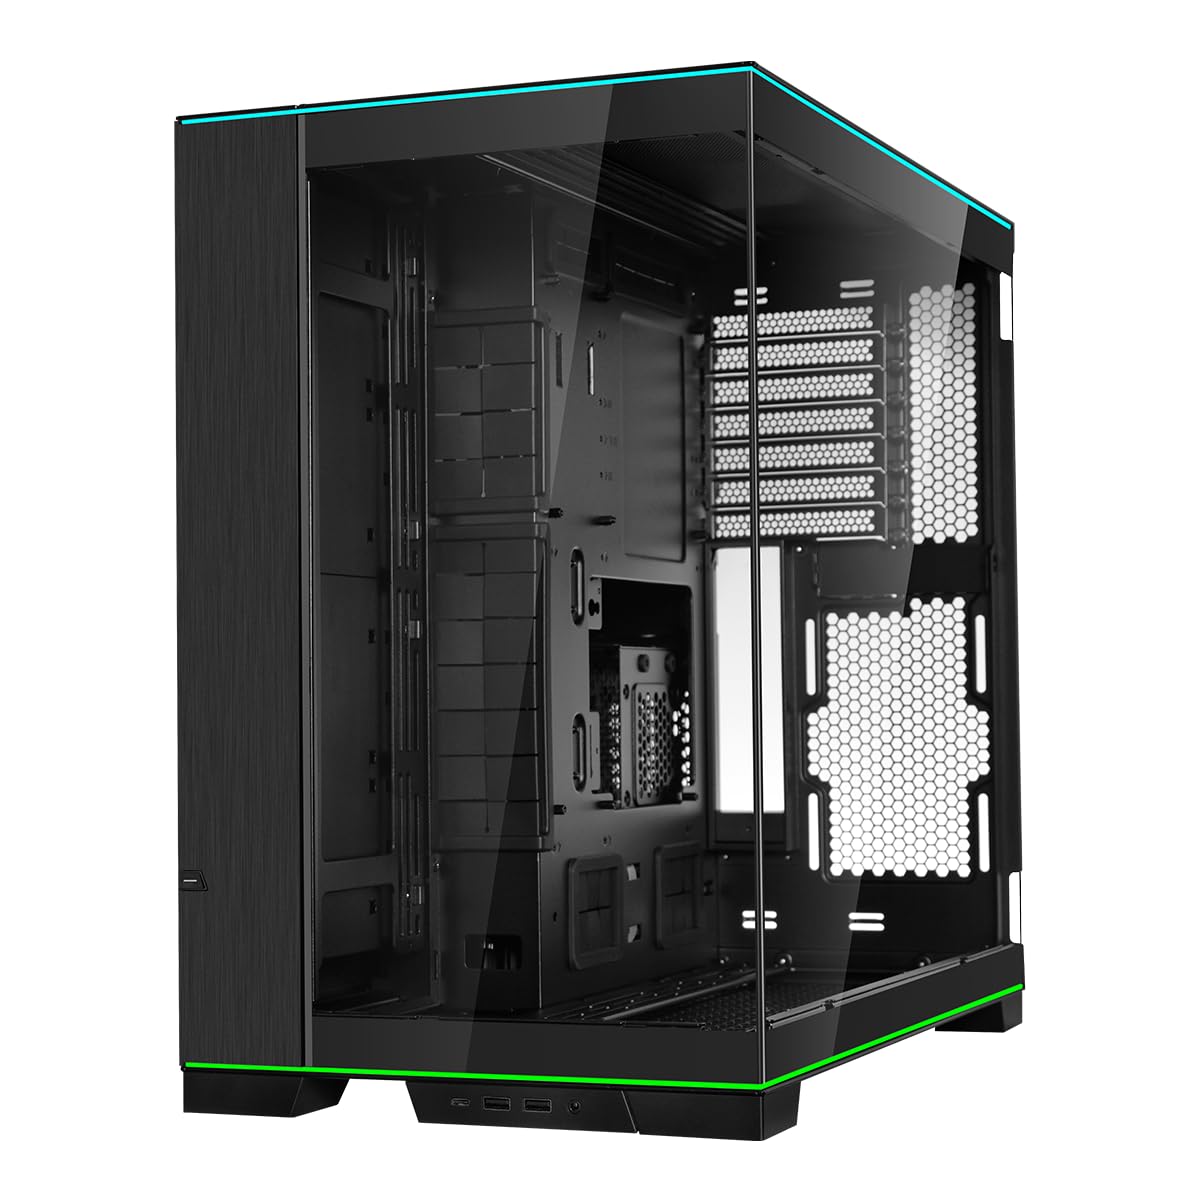 Lian Li O11D EVO RGB E-ATX gaming dual chamber case - ARGB lighting strips - Up to 420mm radiator - Cable management - Front and side tempered glass panels - Reversible chassis (O11DERGBX.US)